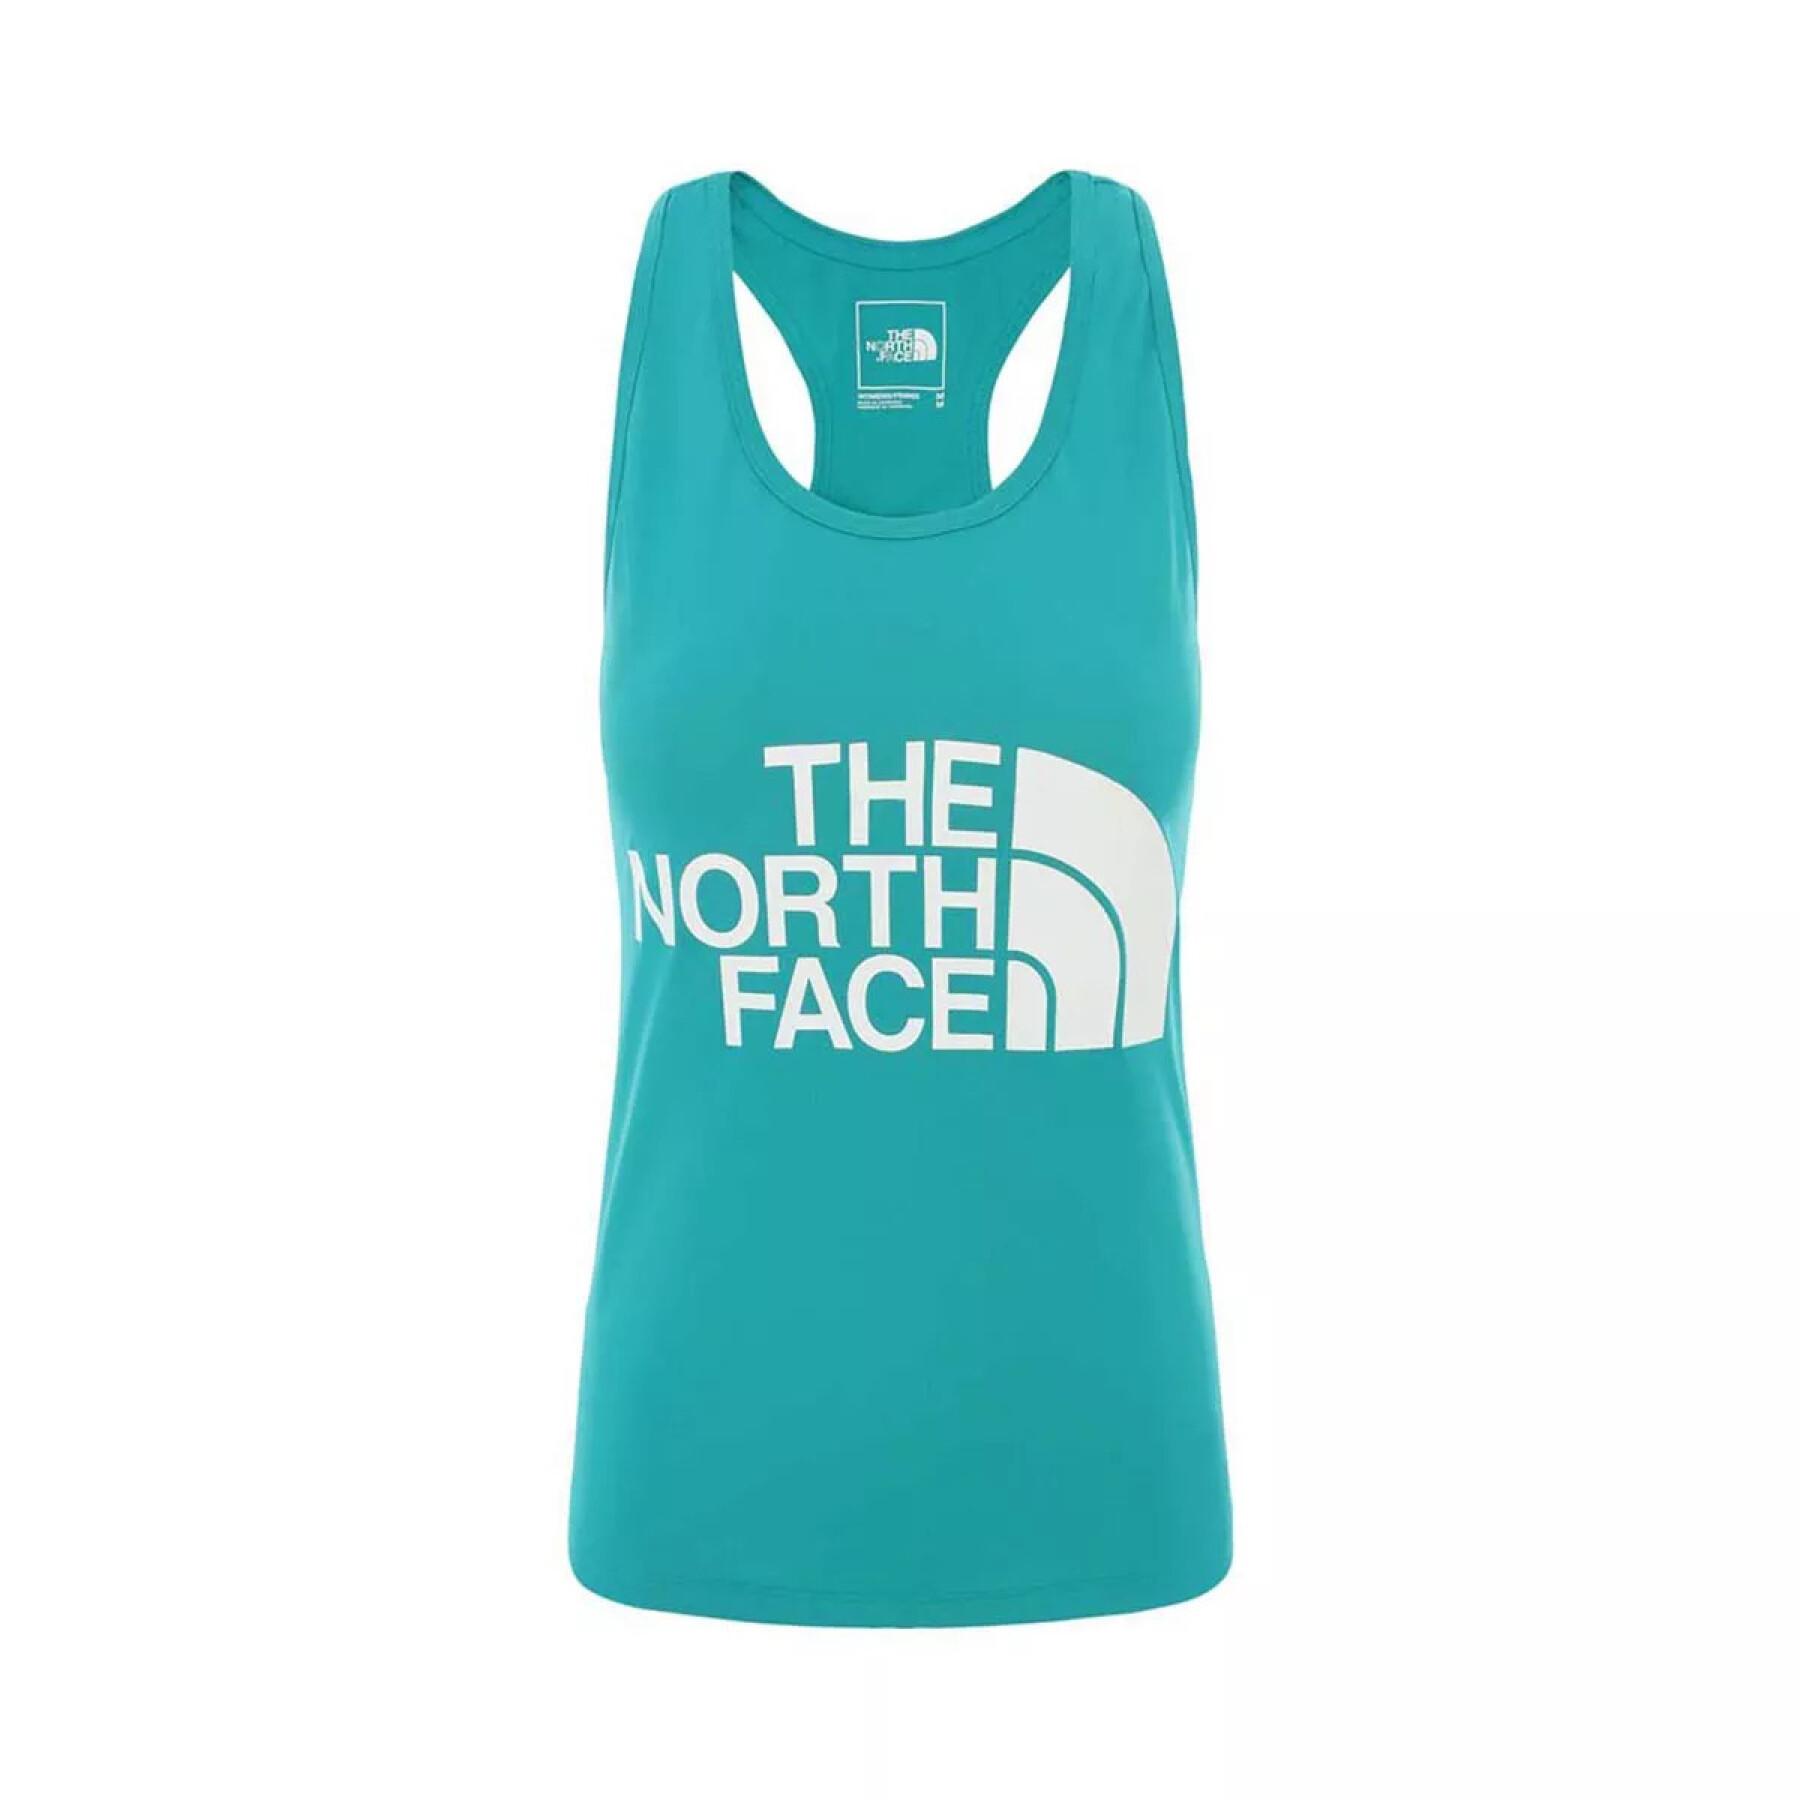 Débardeur femme The North Face Graphic Play Hard